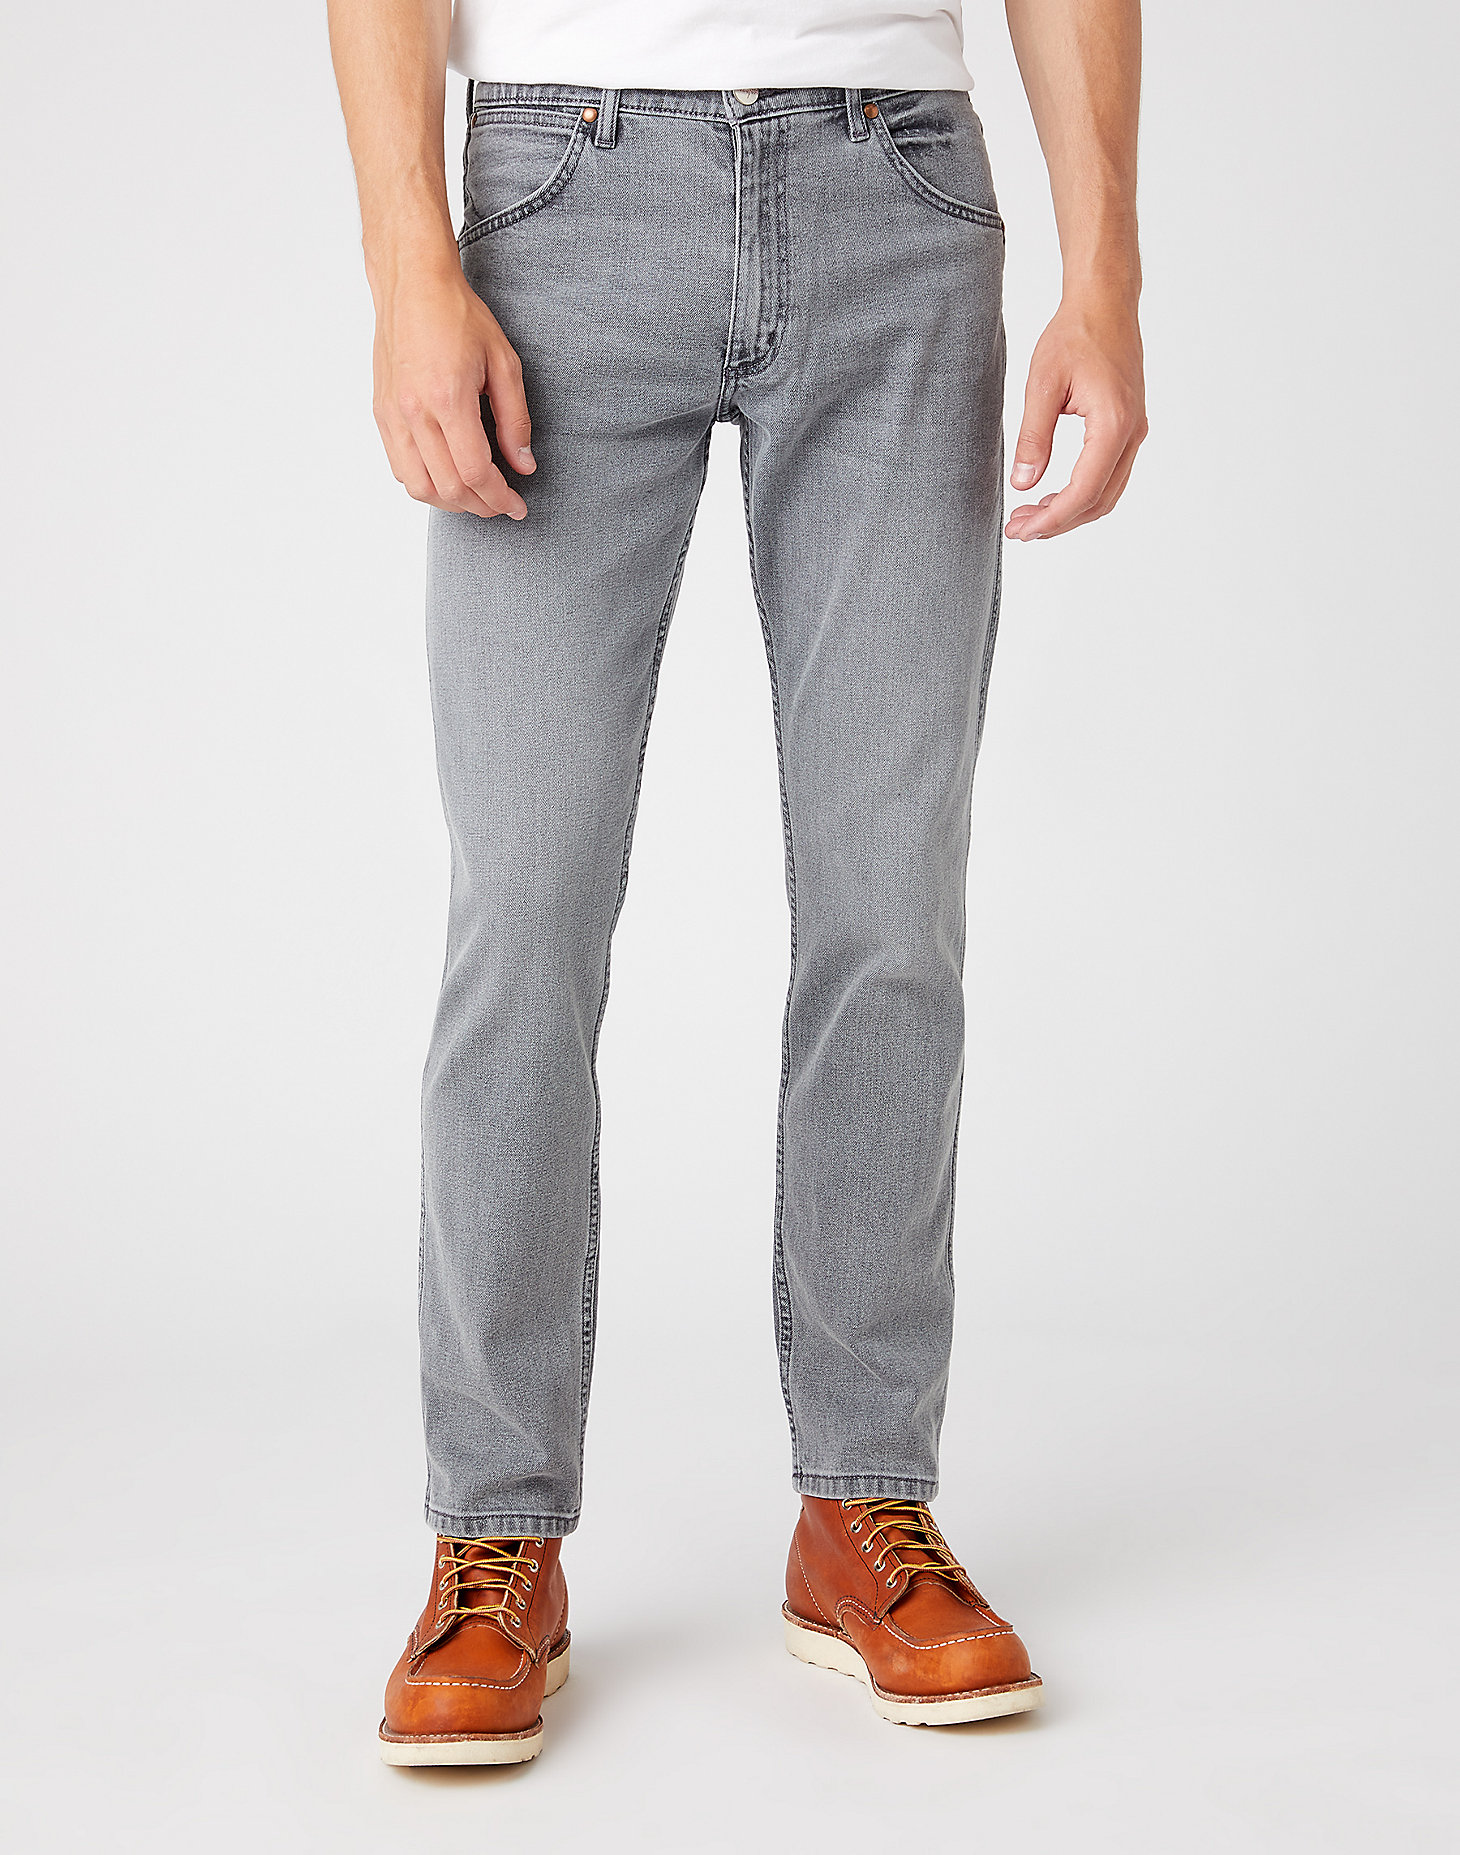 Icons 11MWZ Western Slim Jeans in Golden Grey main view